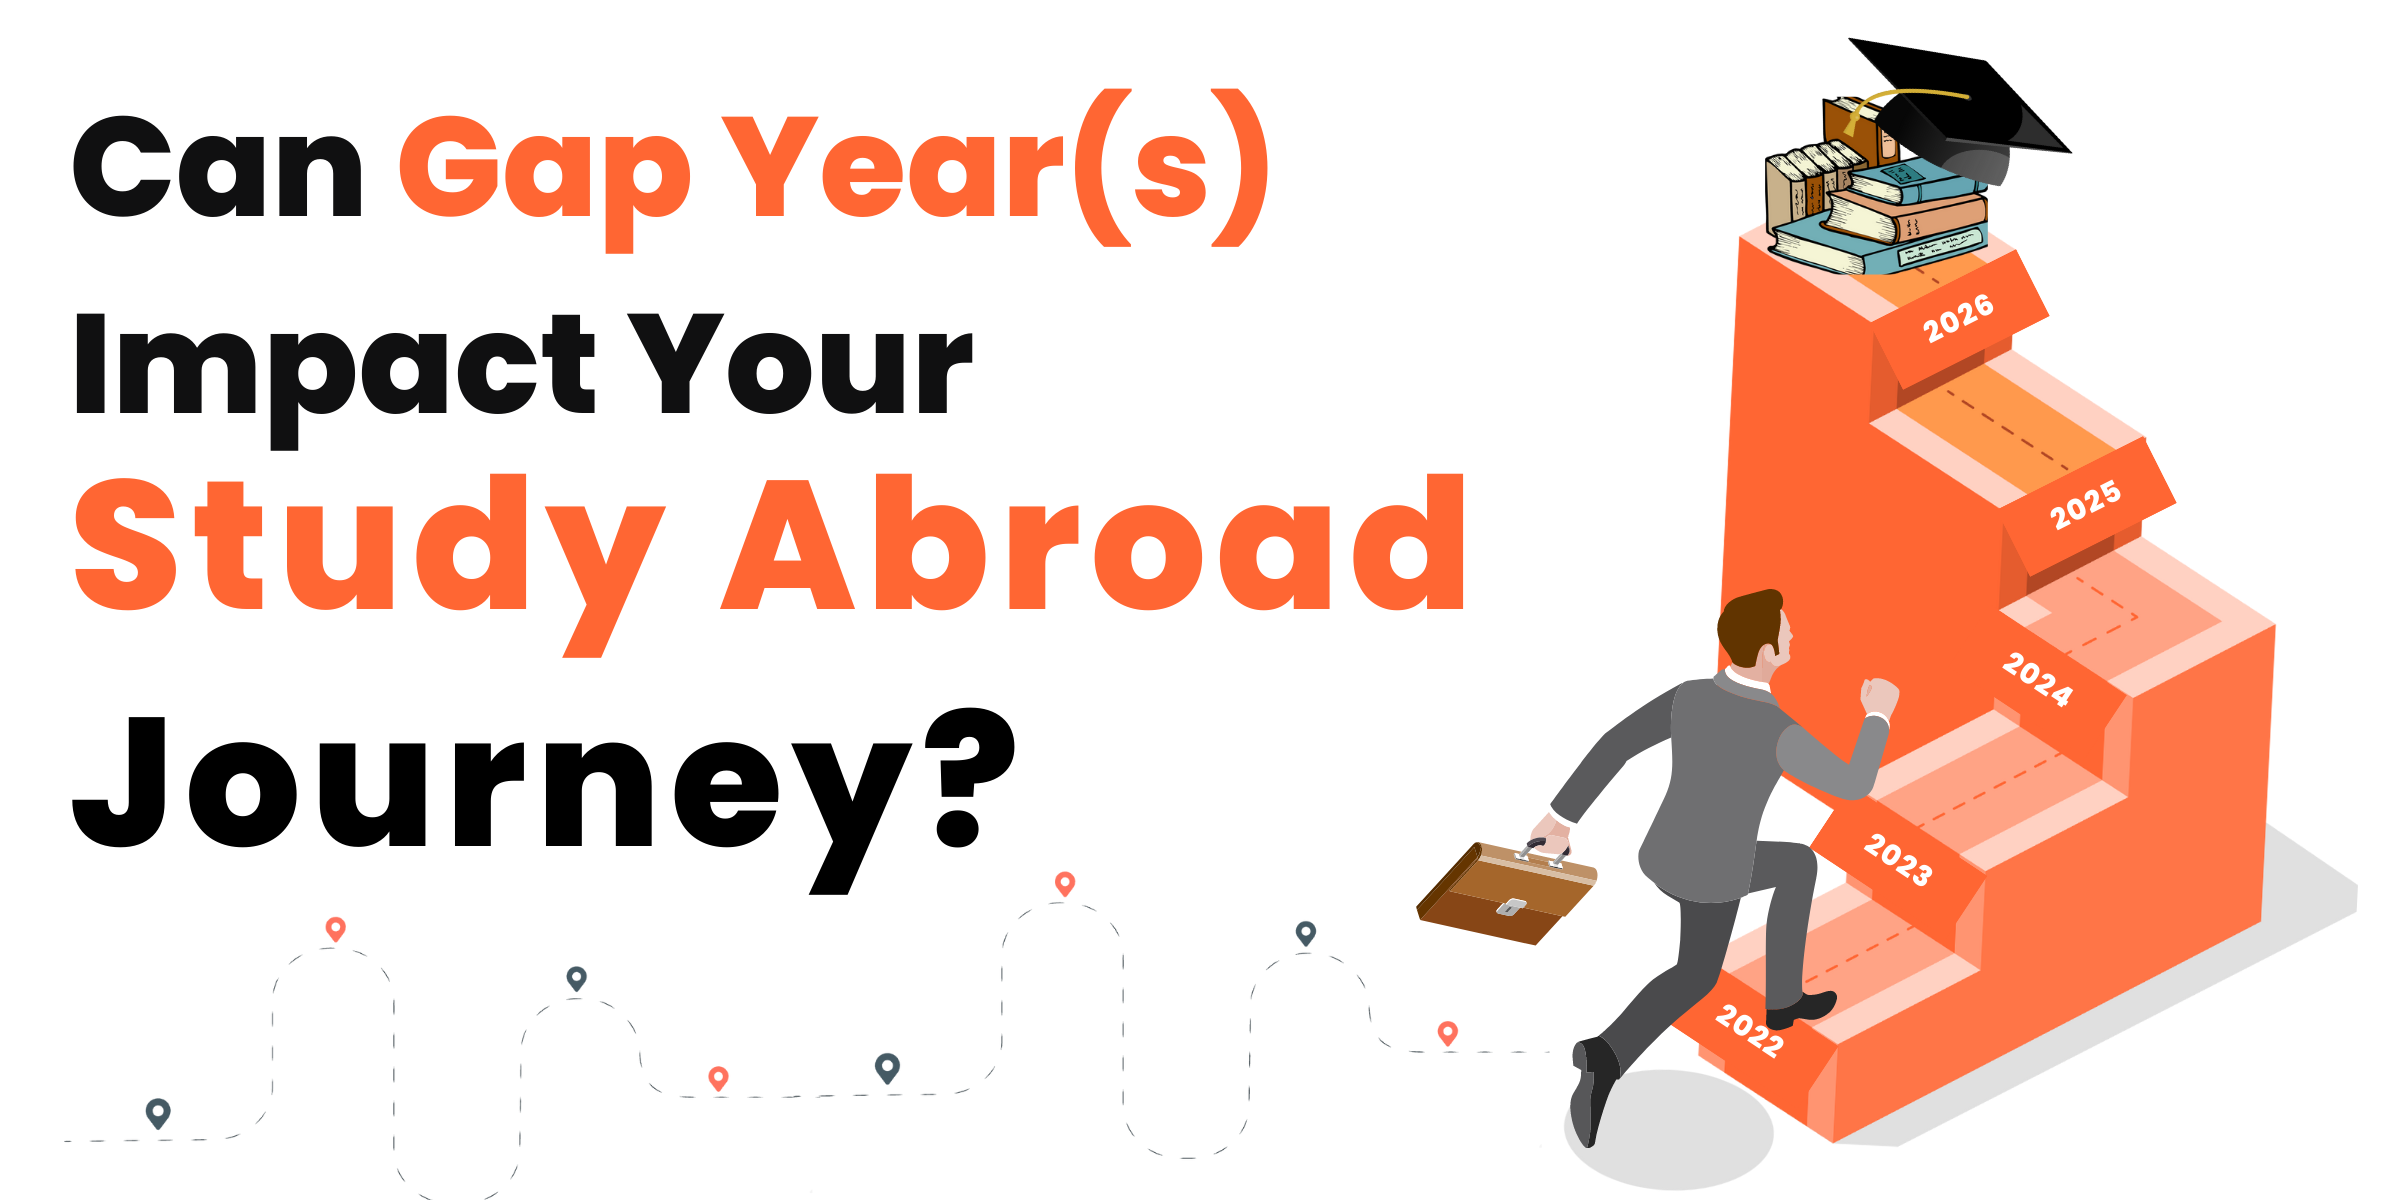 Can gap years impact your study abroad journey?